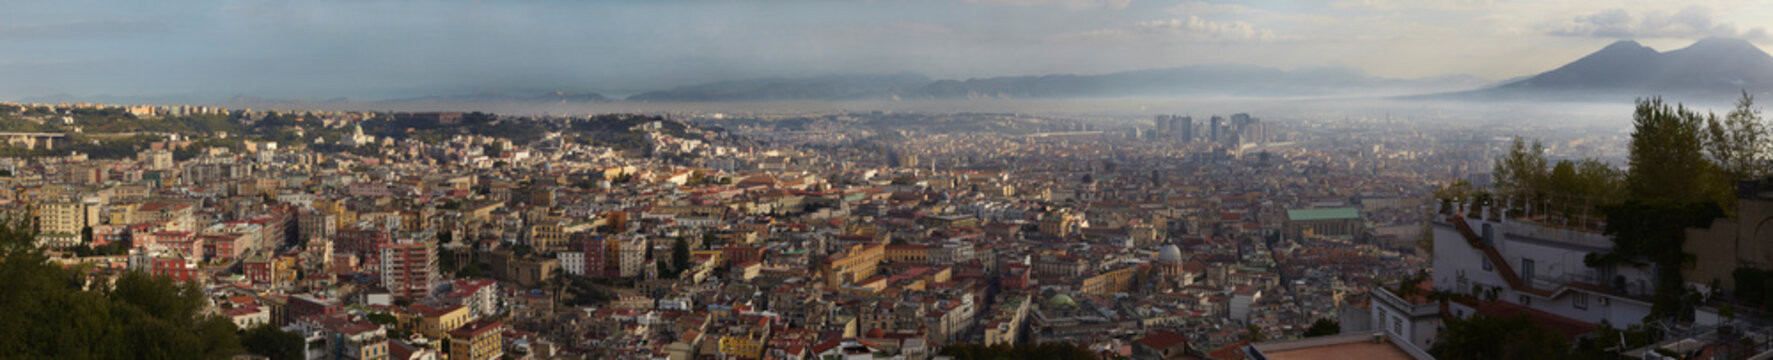 A view of Naples and Mt Vesuvius from Castel Sant'Elmo, Naples, Italy.; Naples, Italy.